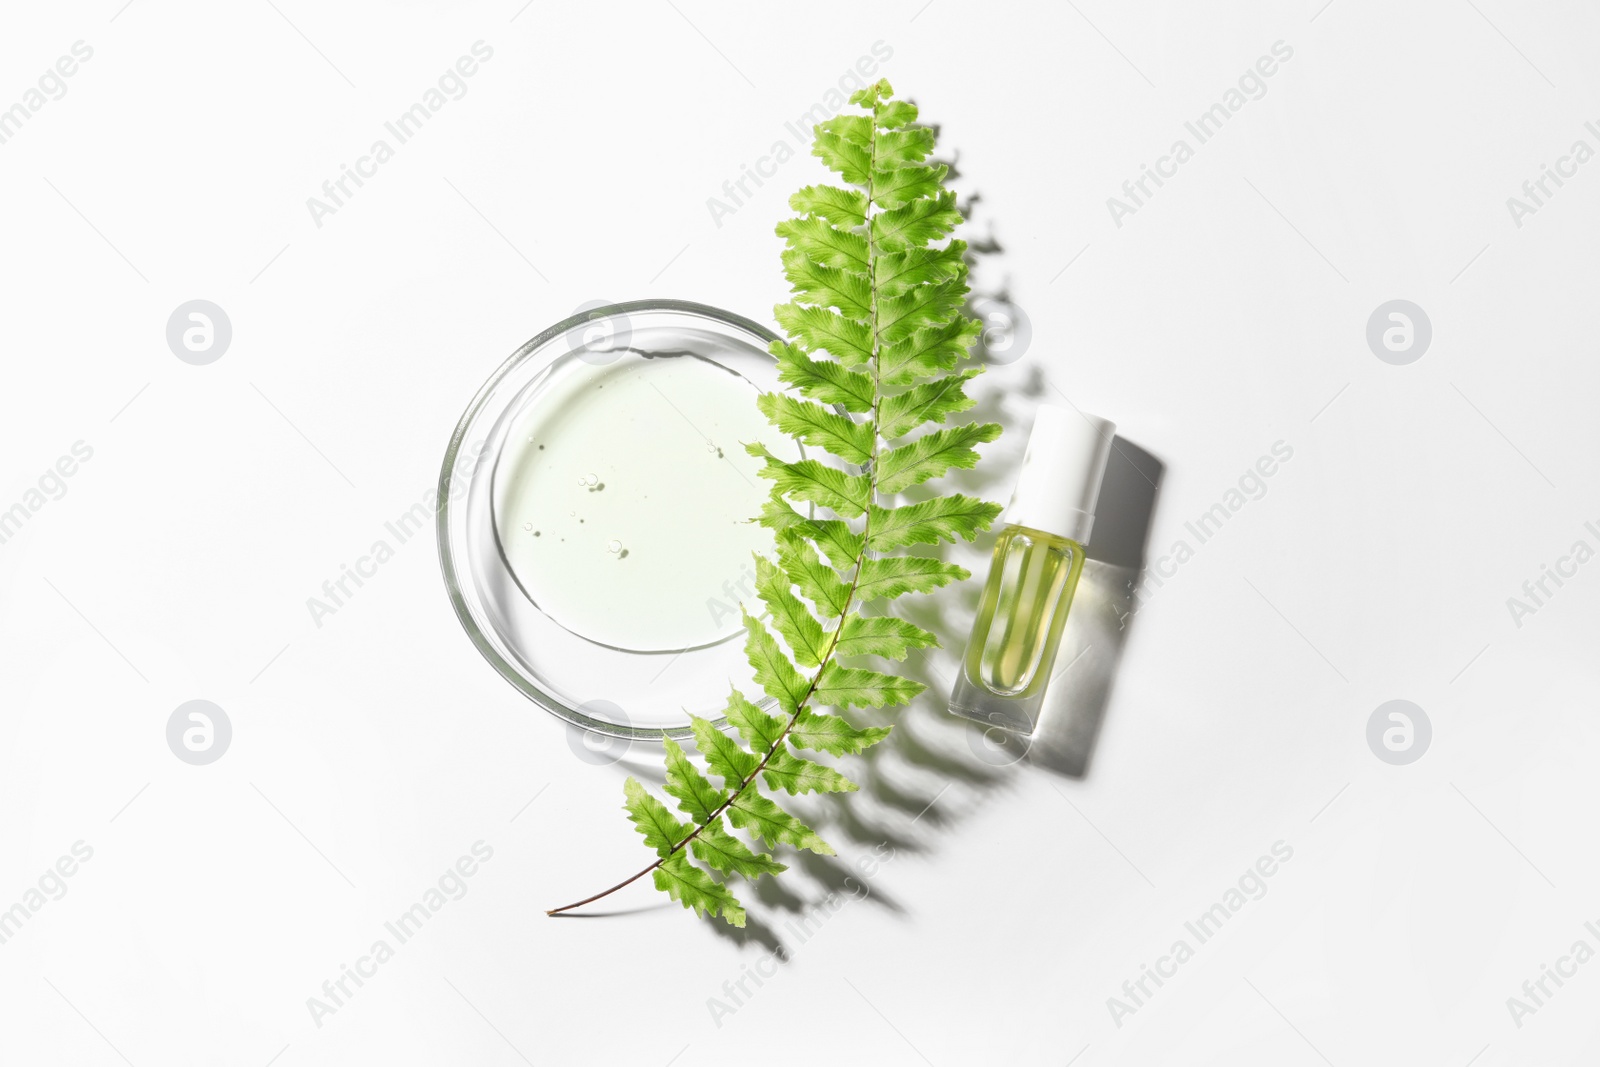 Photo of Petri dish with sample, leaf and bottle on white background, top view